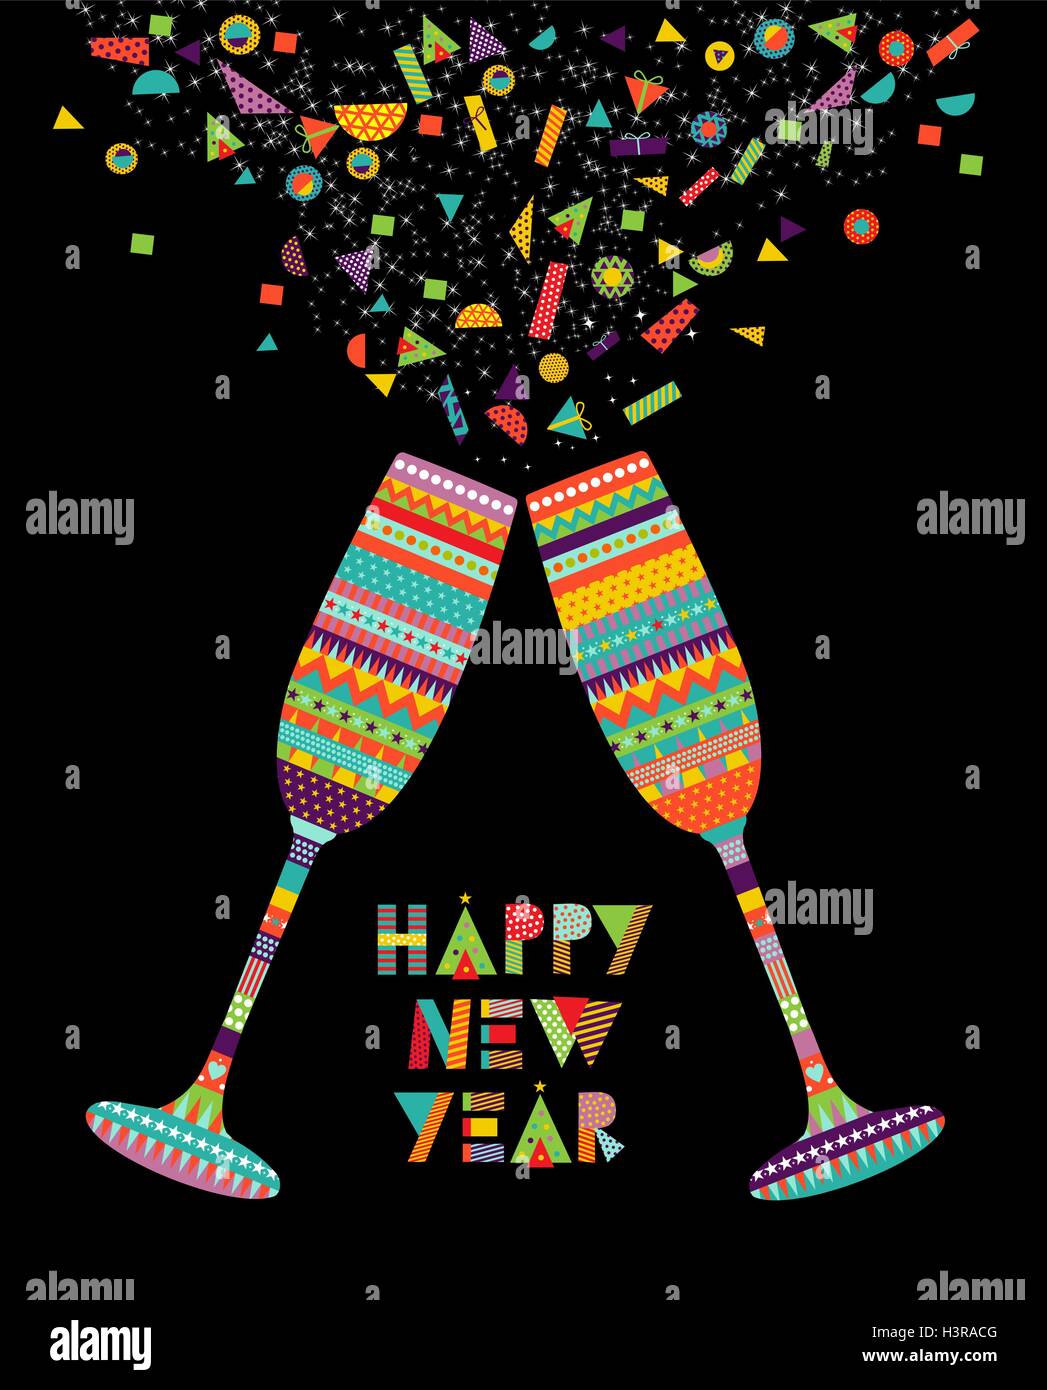 Fun Happy New Year card design with drink glass making toast and colorful decoration. EPS10 vector. Stock Vector